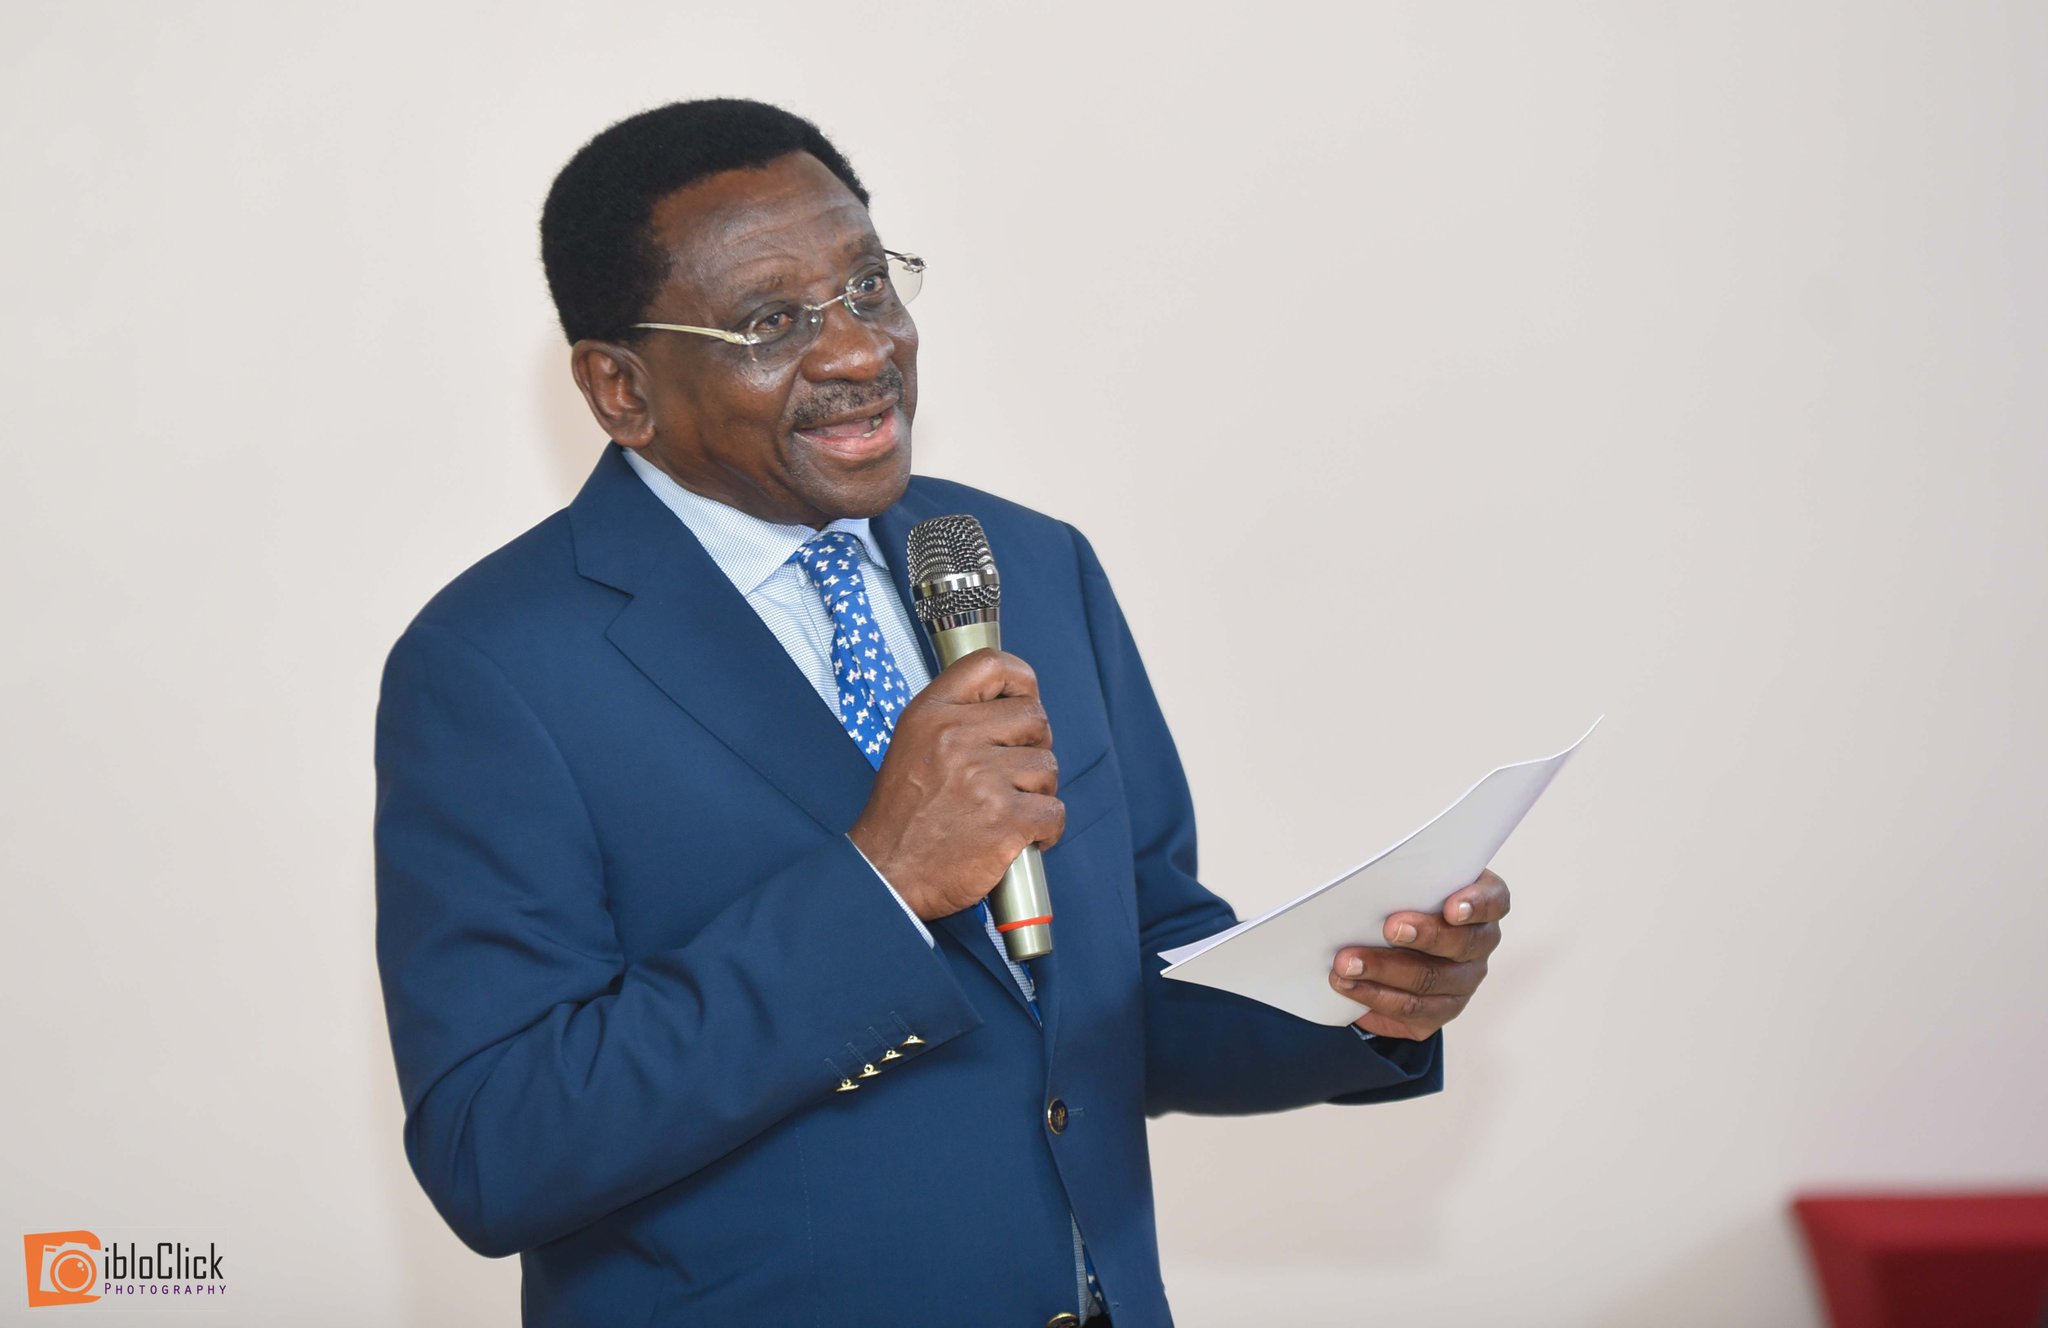 James Orengo Biography, Age, Siblings, Family, Wife, and More